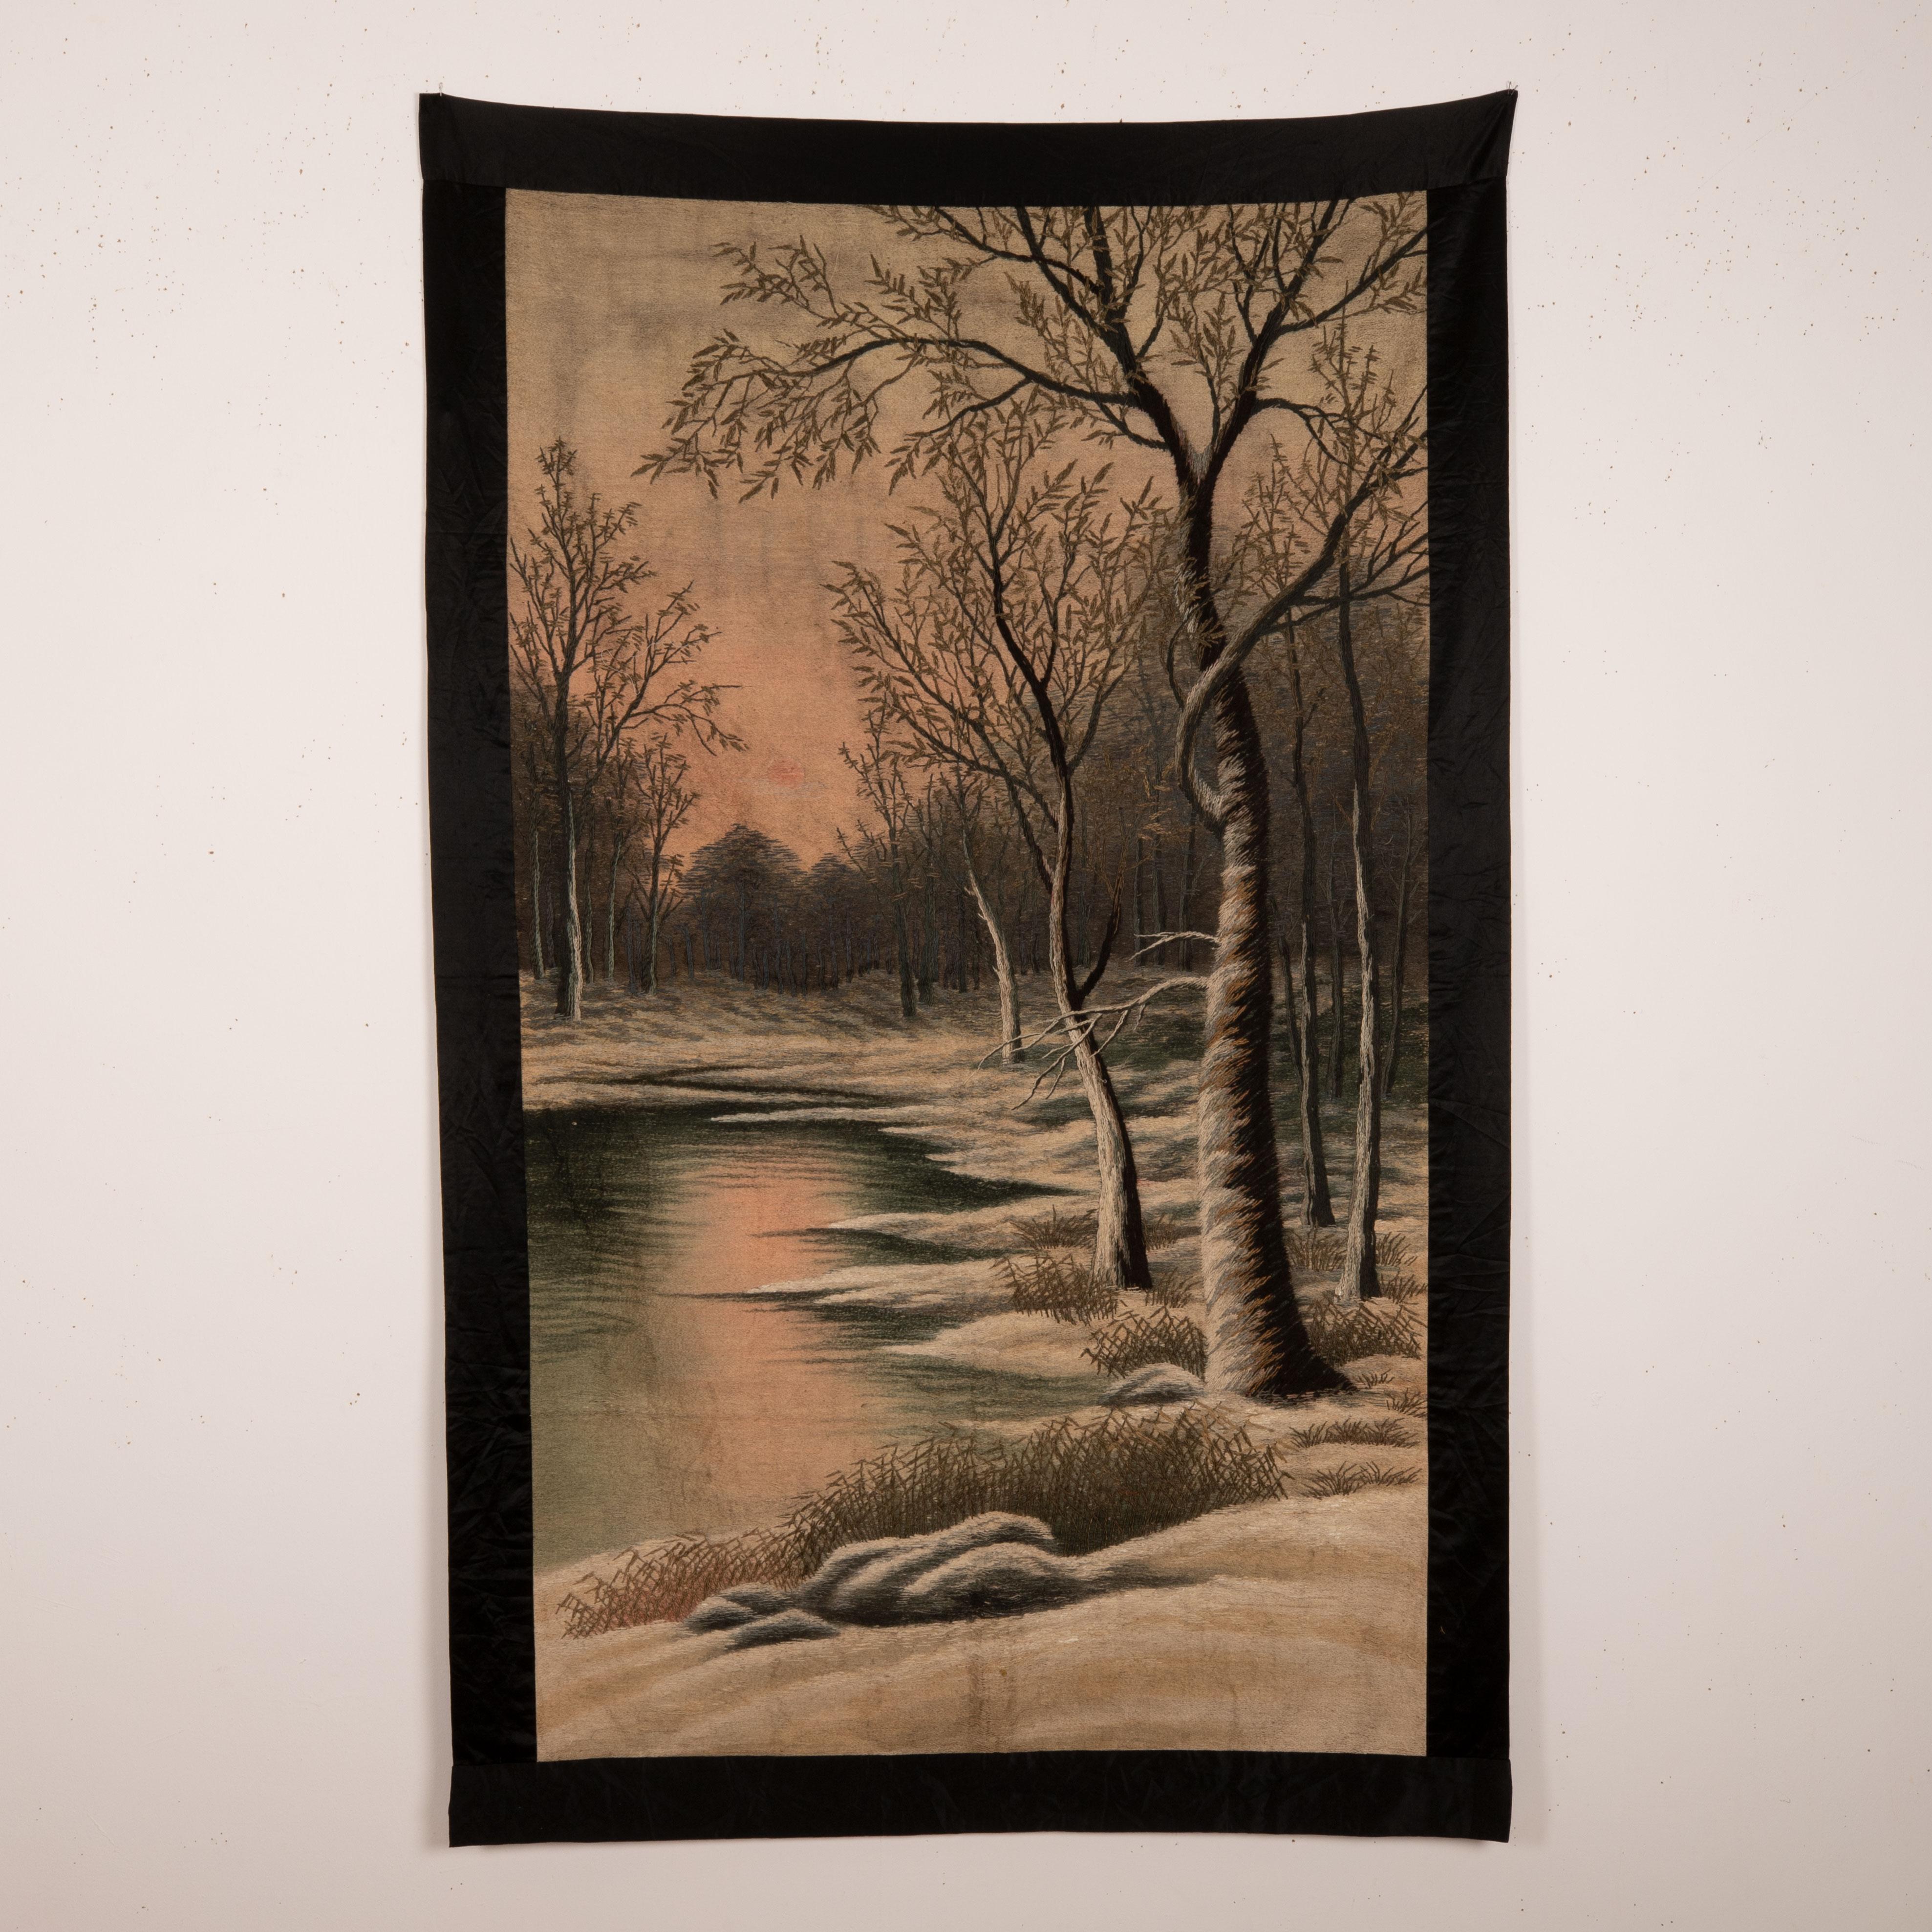 A finely done embroidered landscape hanging from Japan.